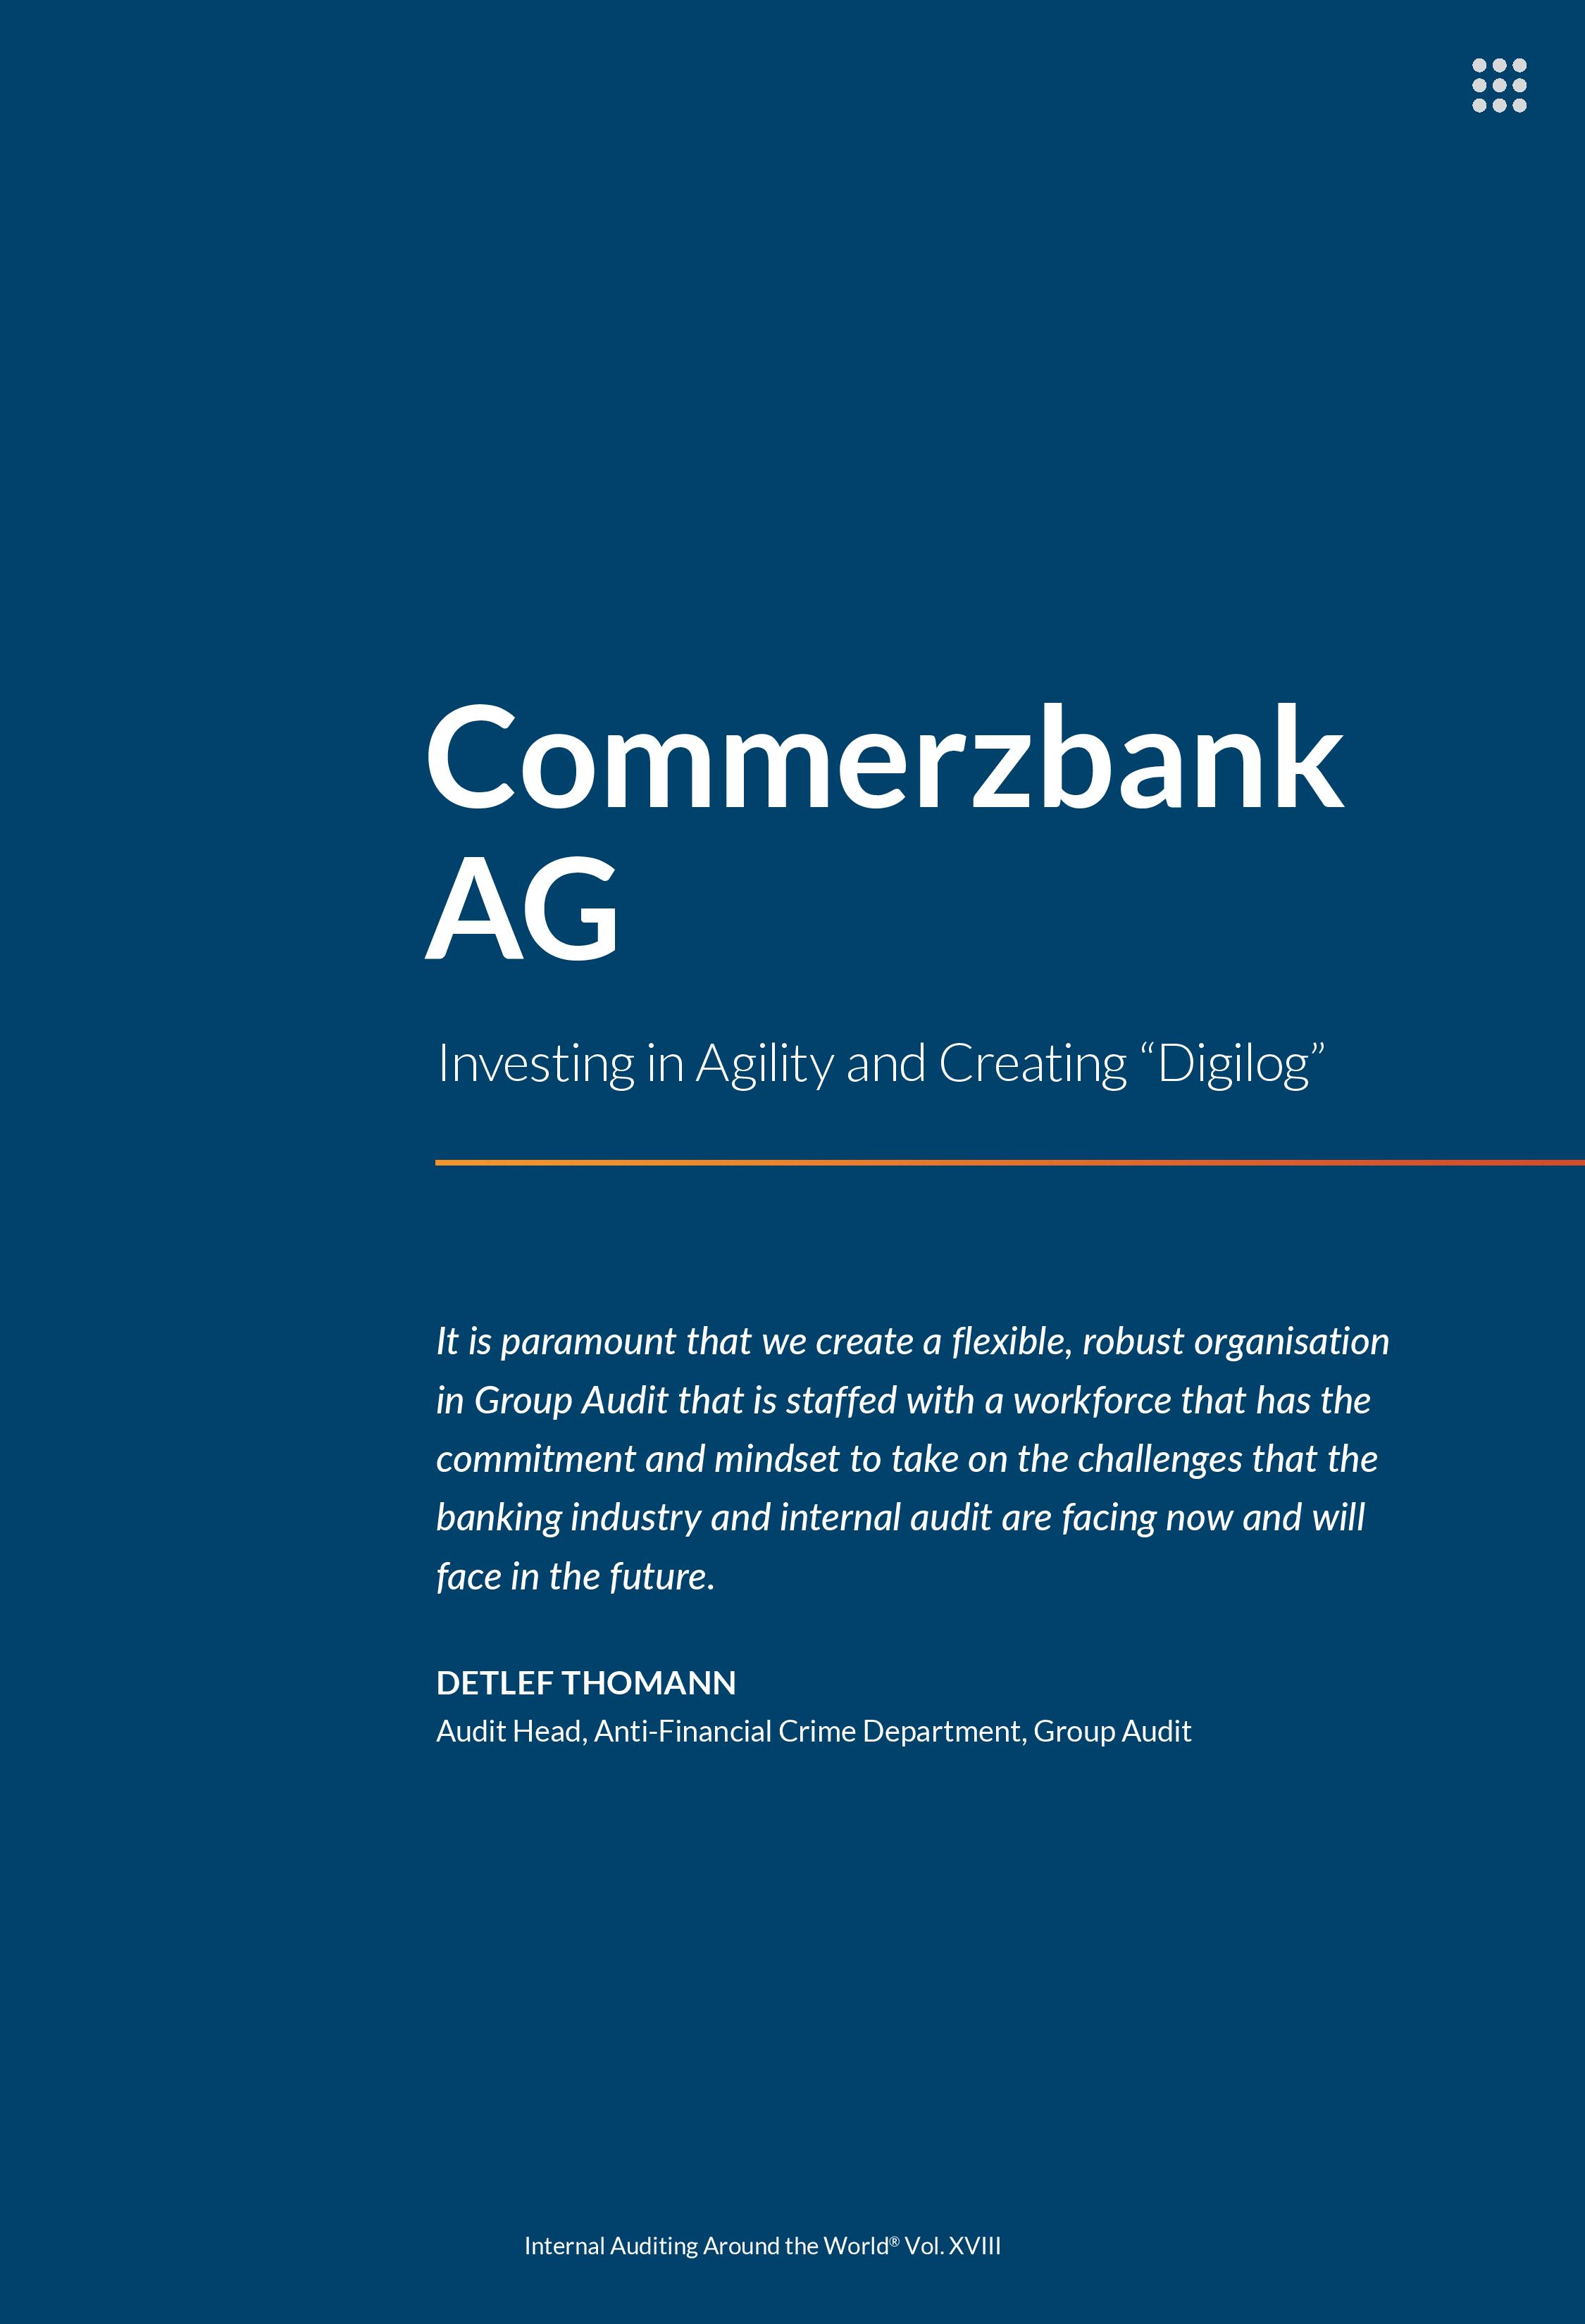 Screenshot of the First Page of Commerzbank